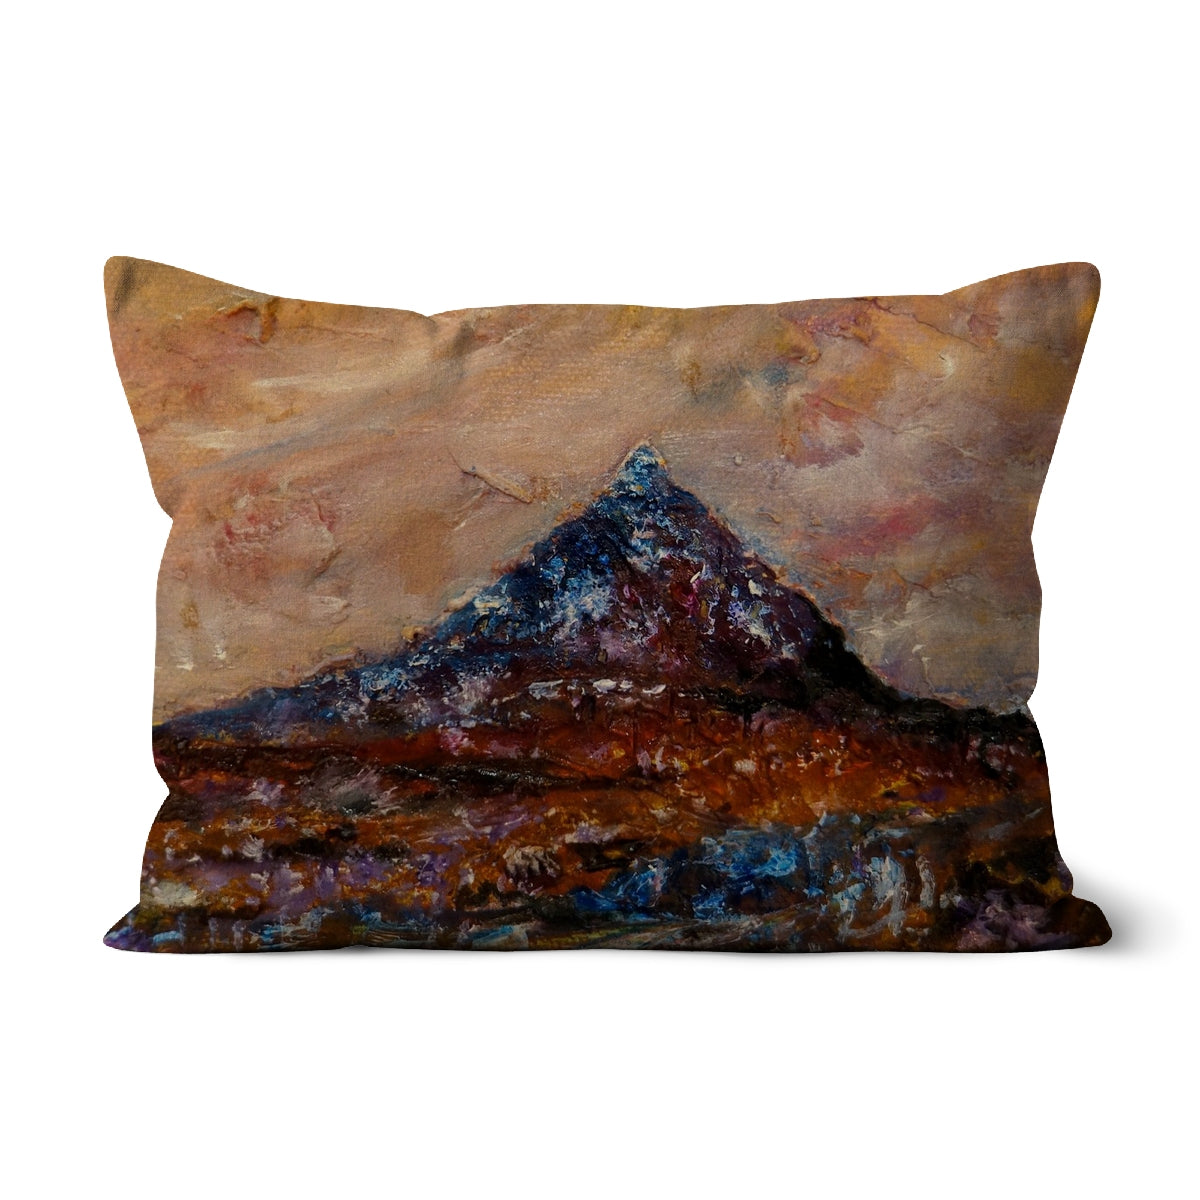 Buachaille Etive Mòr Art Gifts Cushion-Cushions-Glencoe Art Gallery-Faux Suede-19"x13"-Paintings, Prints, Homeware, Art Gifts From Scotland By Scottish Artist Kevin Hunter